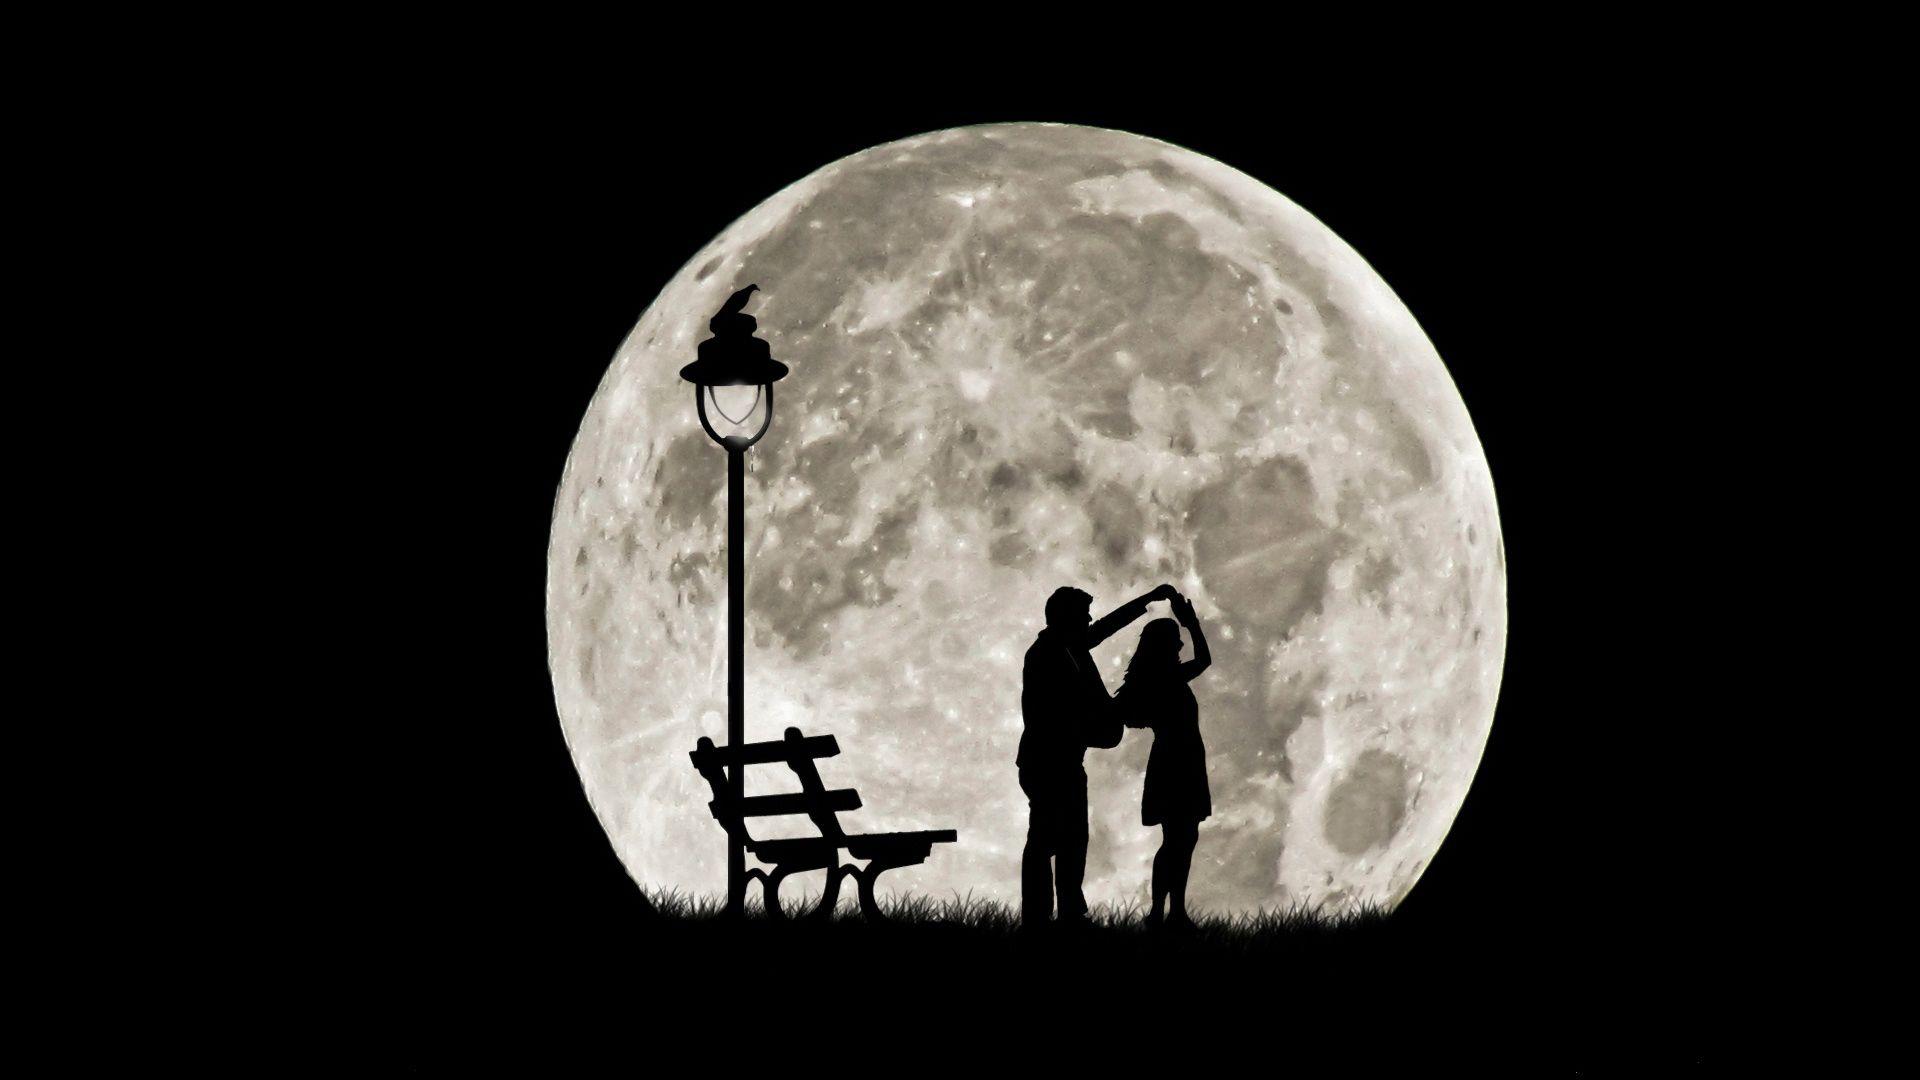 Romantic Moon Wallpapers Top Free Romantic Moon Backgrounds Wallpaperaccess